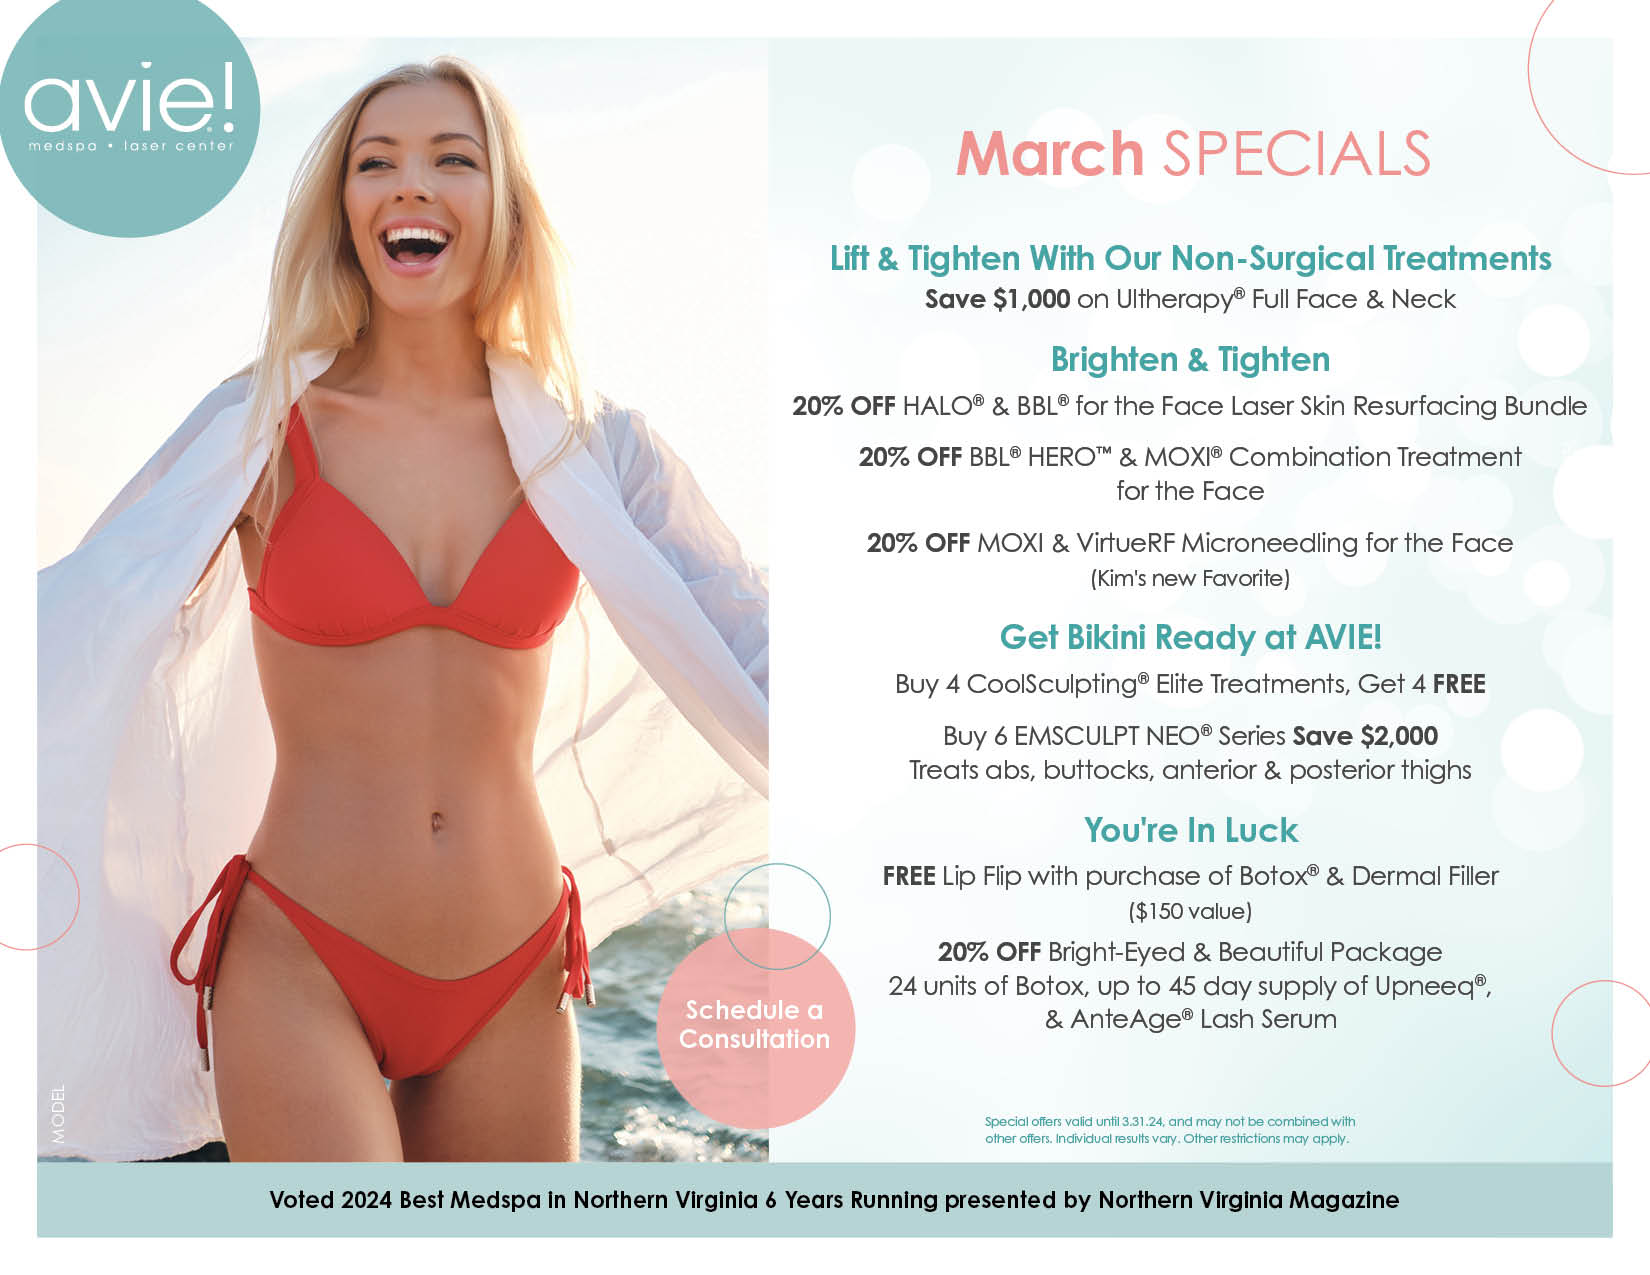 March specials Lift & tighten with our non-surgical treatments save $1,000 on Ultherapy full face & neck Brighten & Tighten: 20% off Halo & BBL for the face laser skin resurfacing bundle 20% off BBL HERO & Moxi combo treatment for the face 20% off Moxi & VirtueRF Microneedling for the face (Kim's new favorite) Get Bikini Ready at AVIE!: Buy 4 CoolSculpting Elite treatments, get 4 FREE Buy 6 Emsculpt NEO series & save $2,000 treats abs, buttocks, anterior & posterior thighs You're in luck: FREE lip flip with purchase of Botox & dermal filler ($150 value) 20% off bright-eyed and beautiful package 24 units of Botox, up to 45-day supply of Upneeq & AnteAge Lash Serum